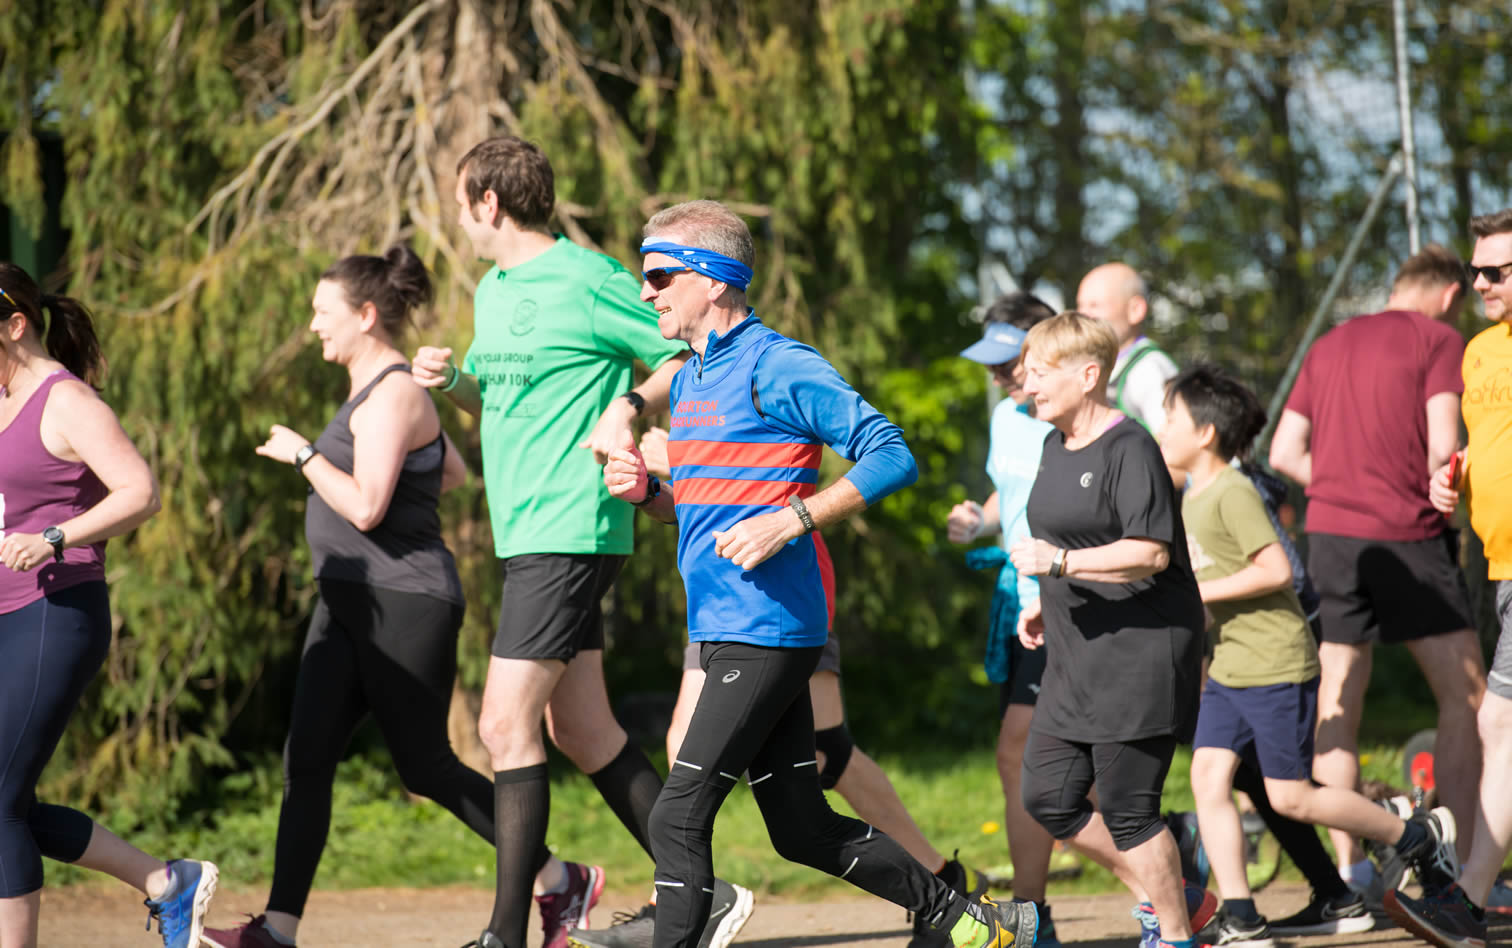 A good start for Alan Thomas at Witney parkrun - 7th May 2022